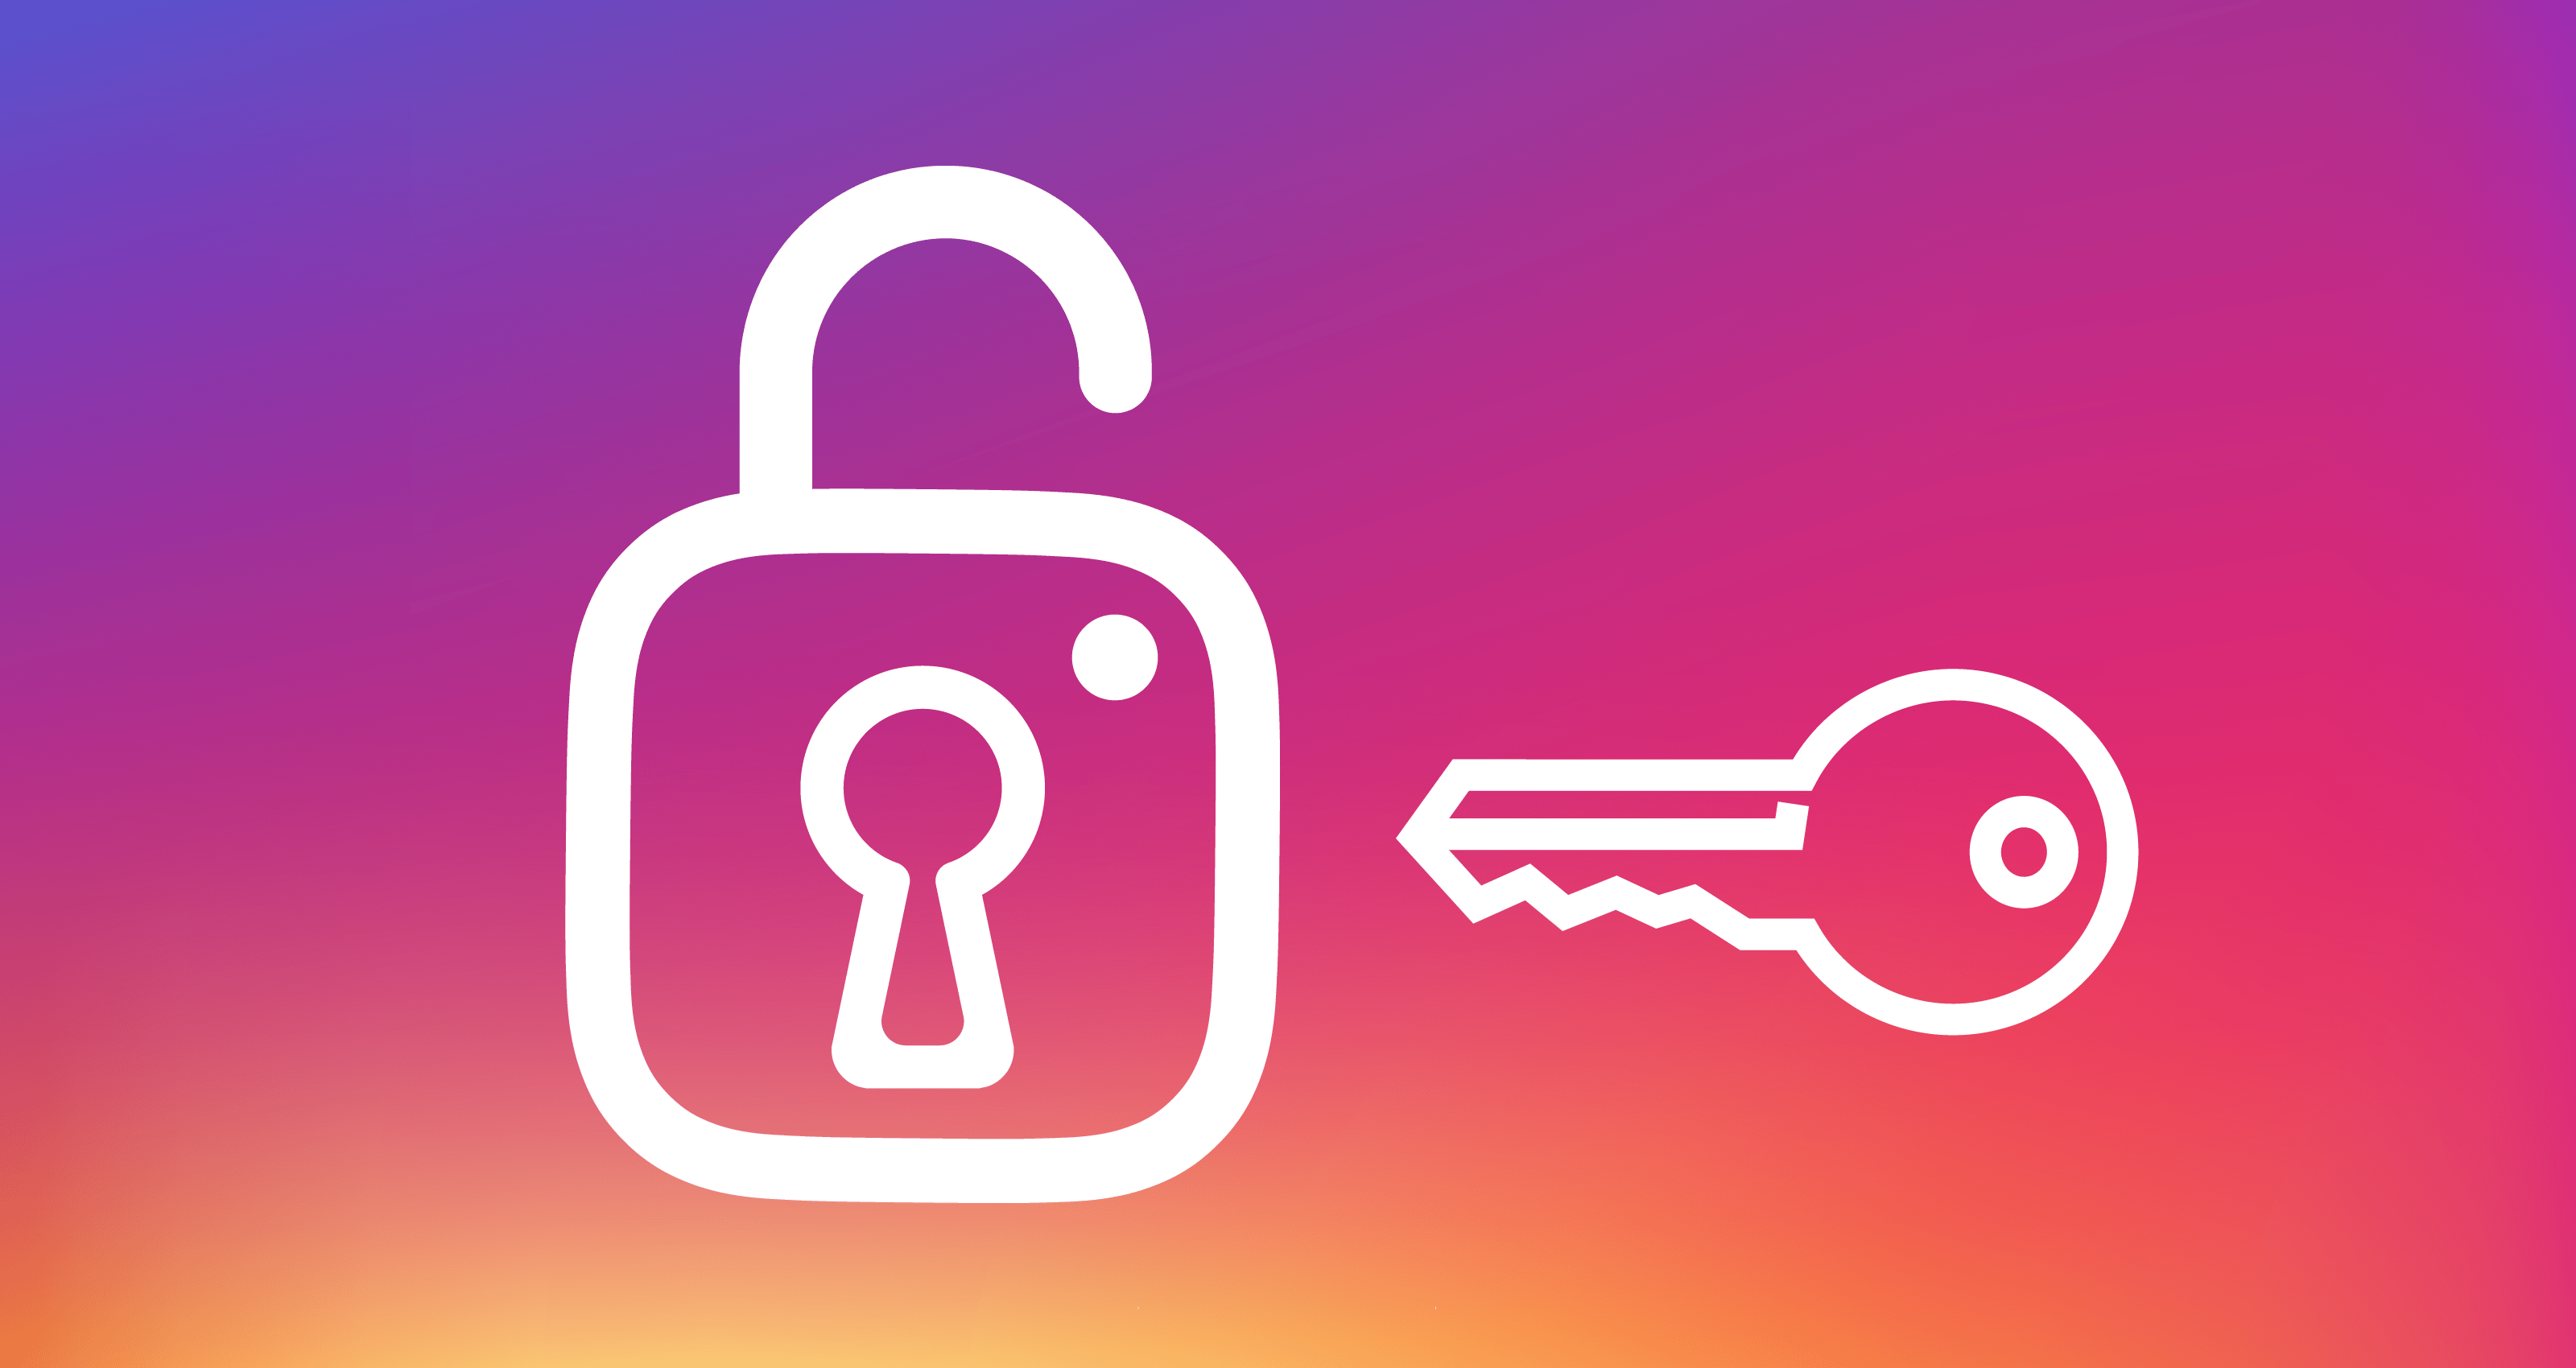 How to download your Instagram photo, Stories, messages